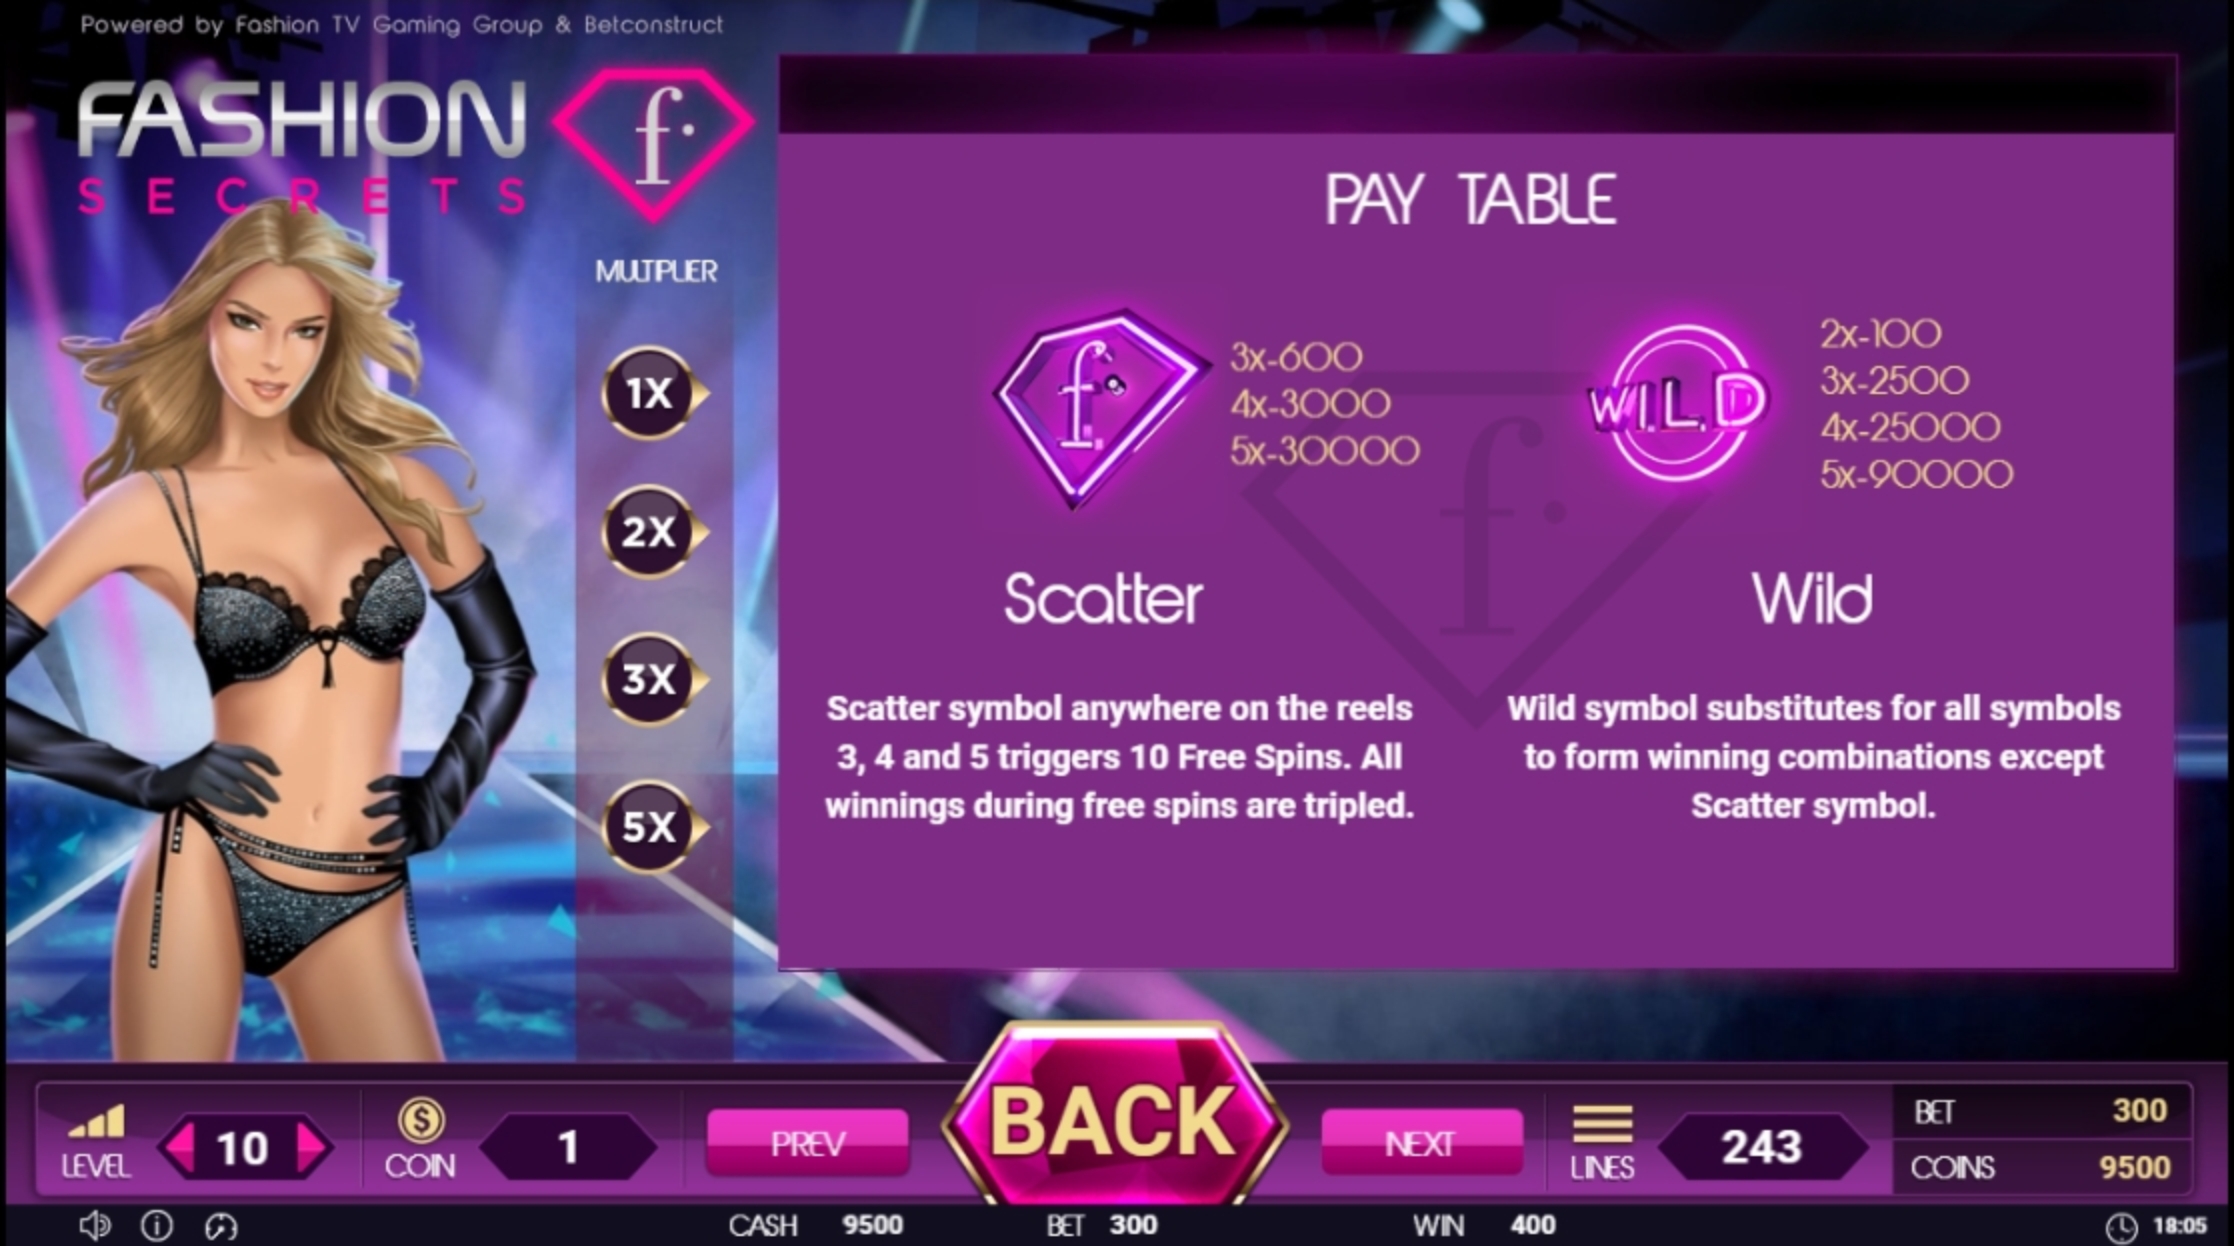 Info of Fashion Secrets Slot Game by Betconstruct